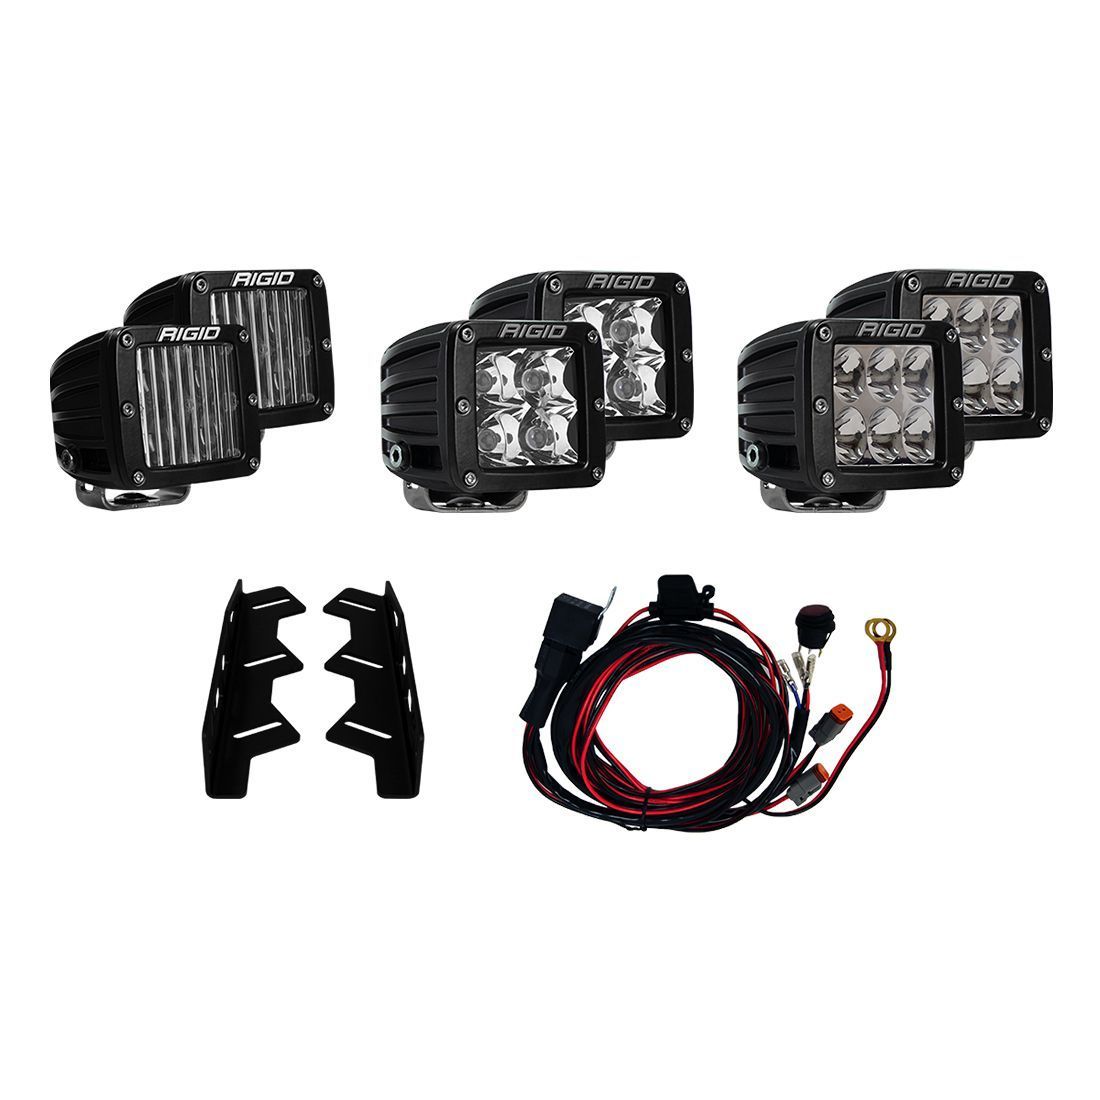 17-18 Ford Rator Fog Mount Kit Lighting Rigid Industries With D-Series Lights parts